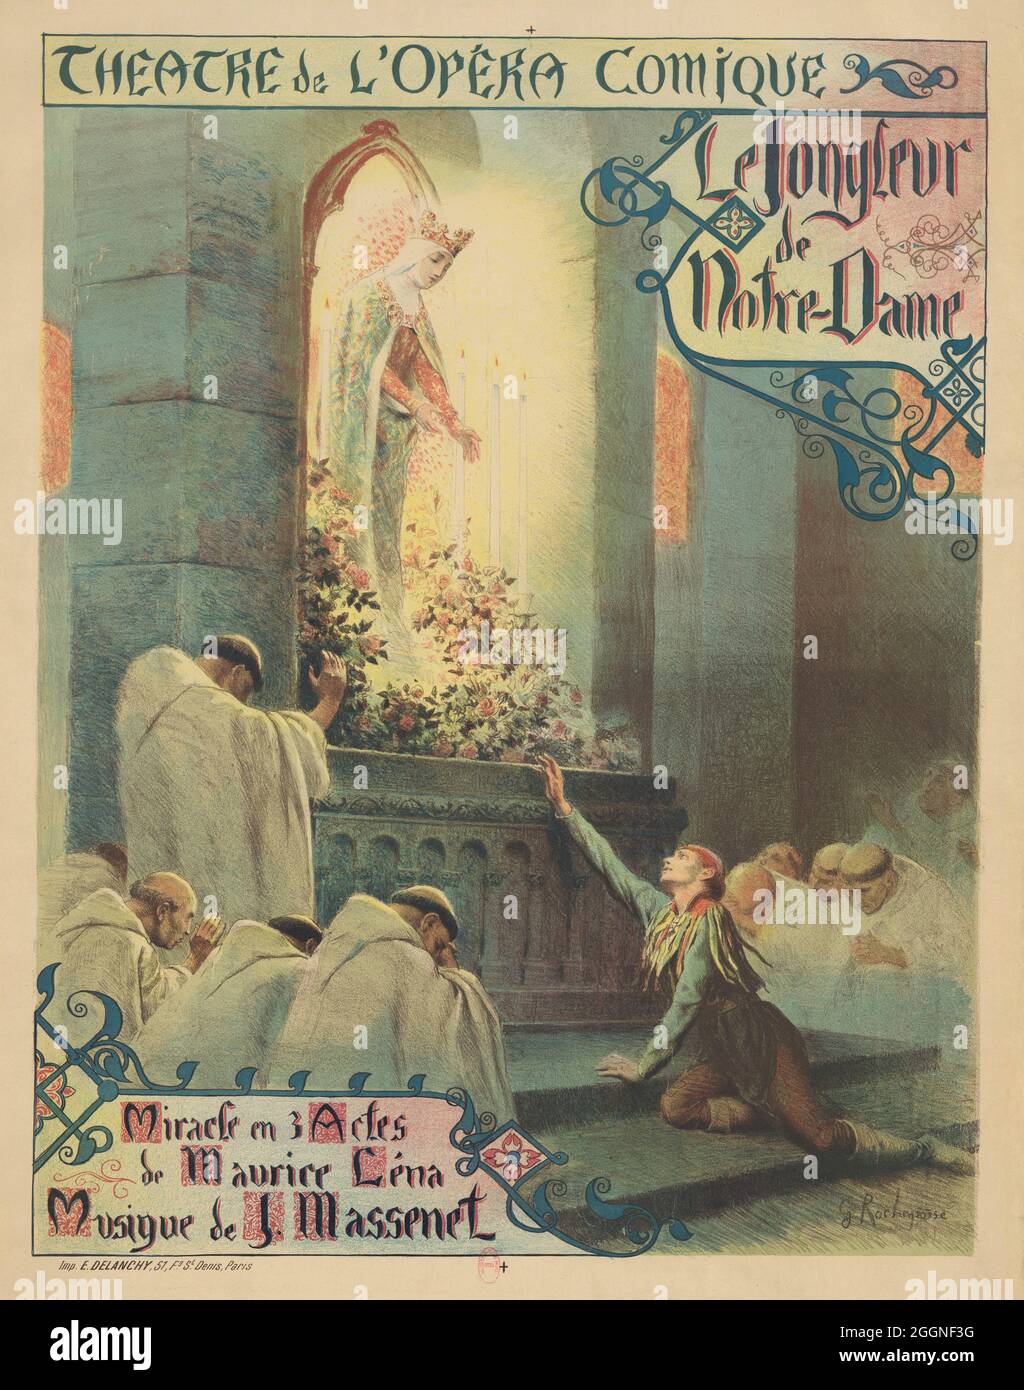 Premiere Poster for the opera Le jongleur de Notre-Dame by Jules Massenet. Museum: PRIVATE COLLECTION. Author: Georges Antoine Rochegrosse. Stock Photo